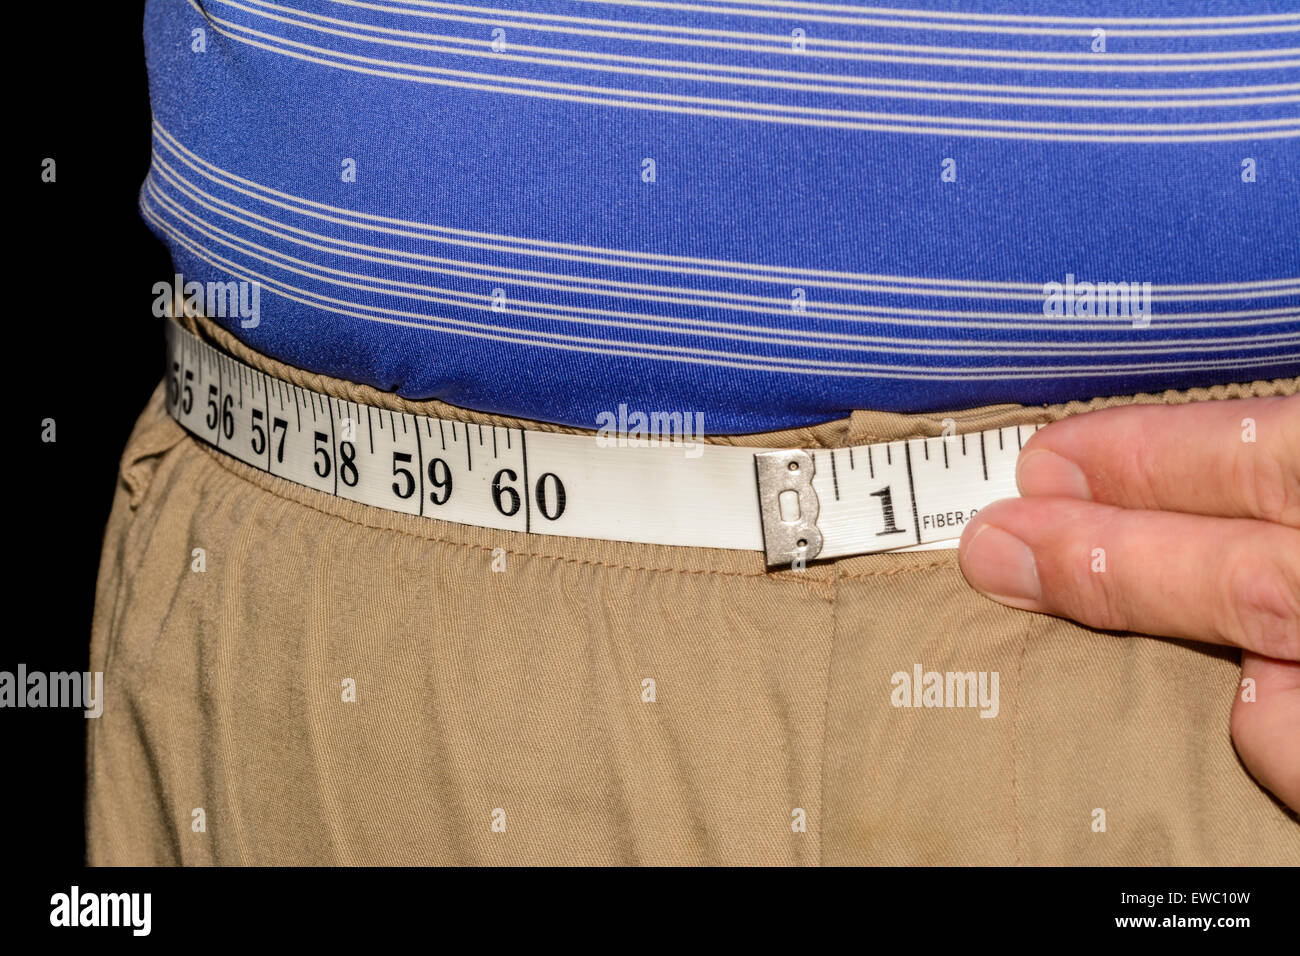 Obese man measuring his waist with a tape measure. Stock Photo